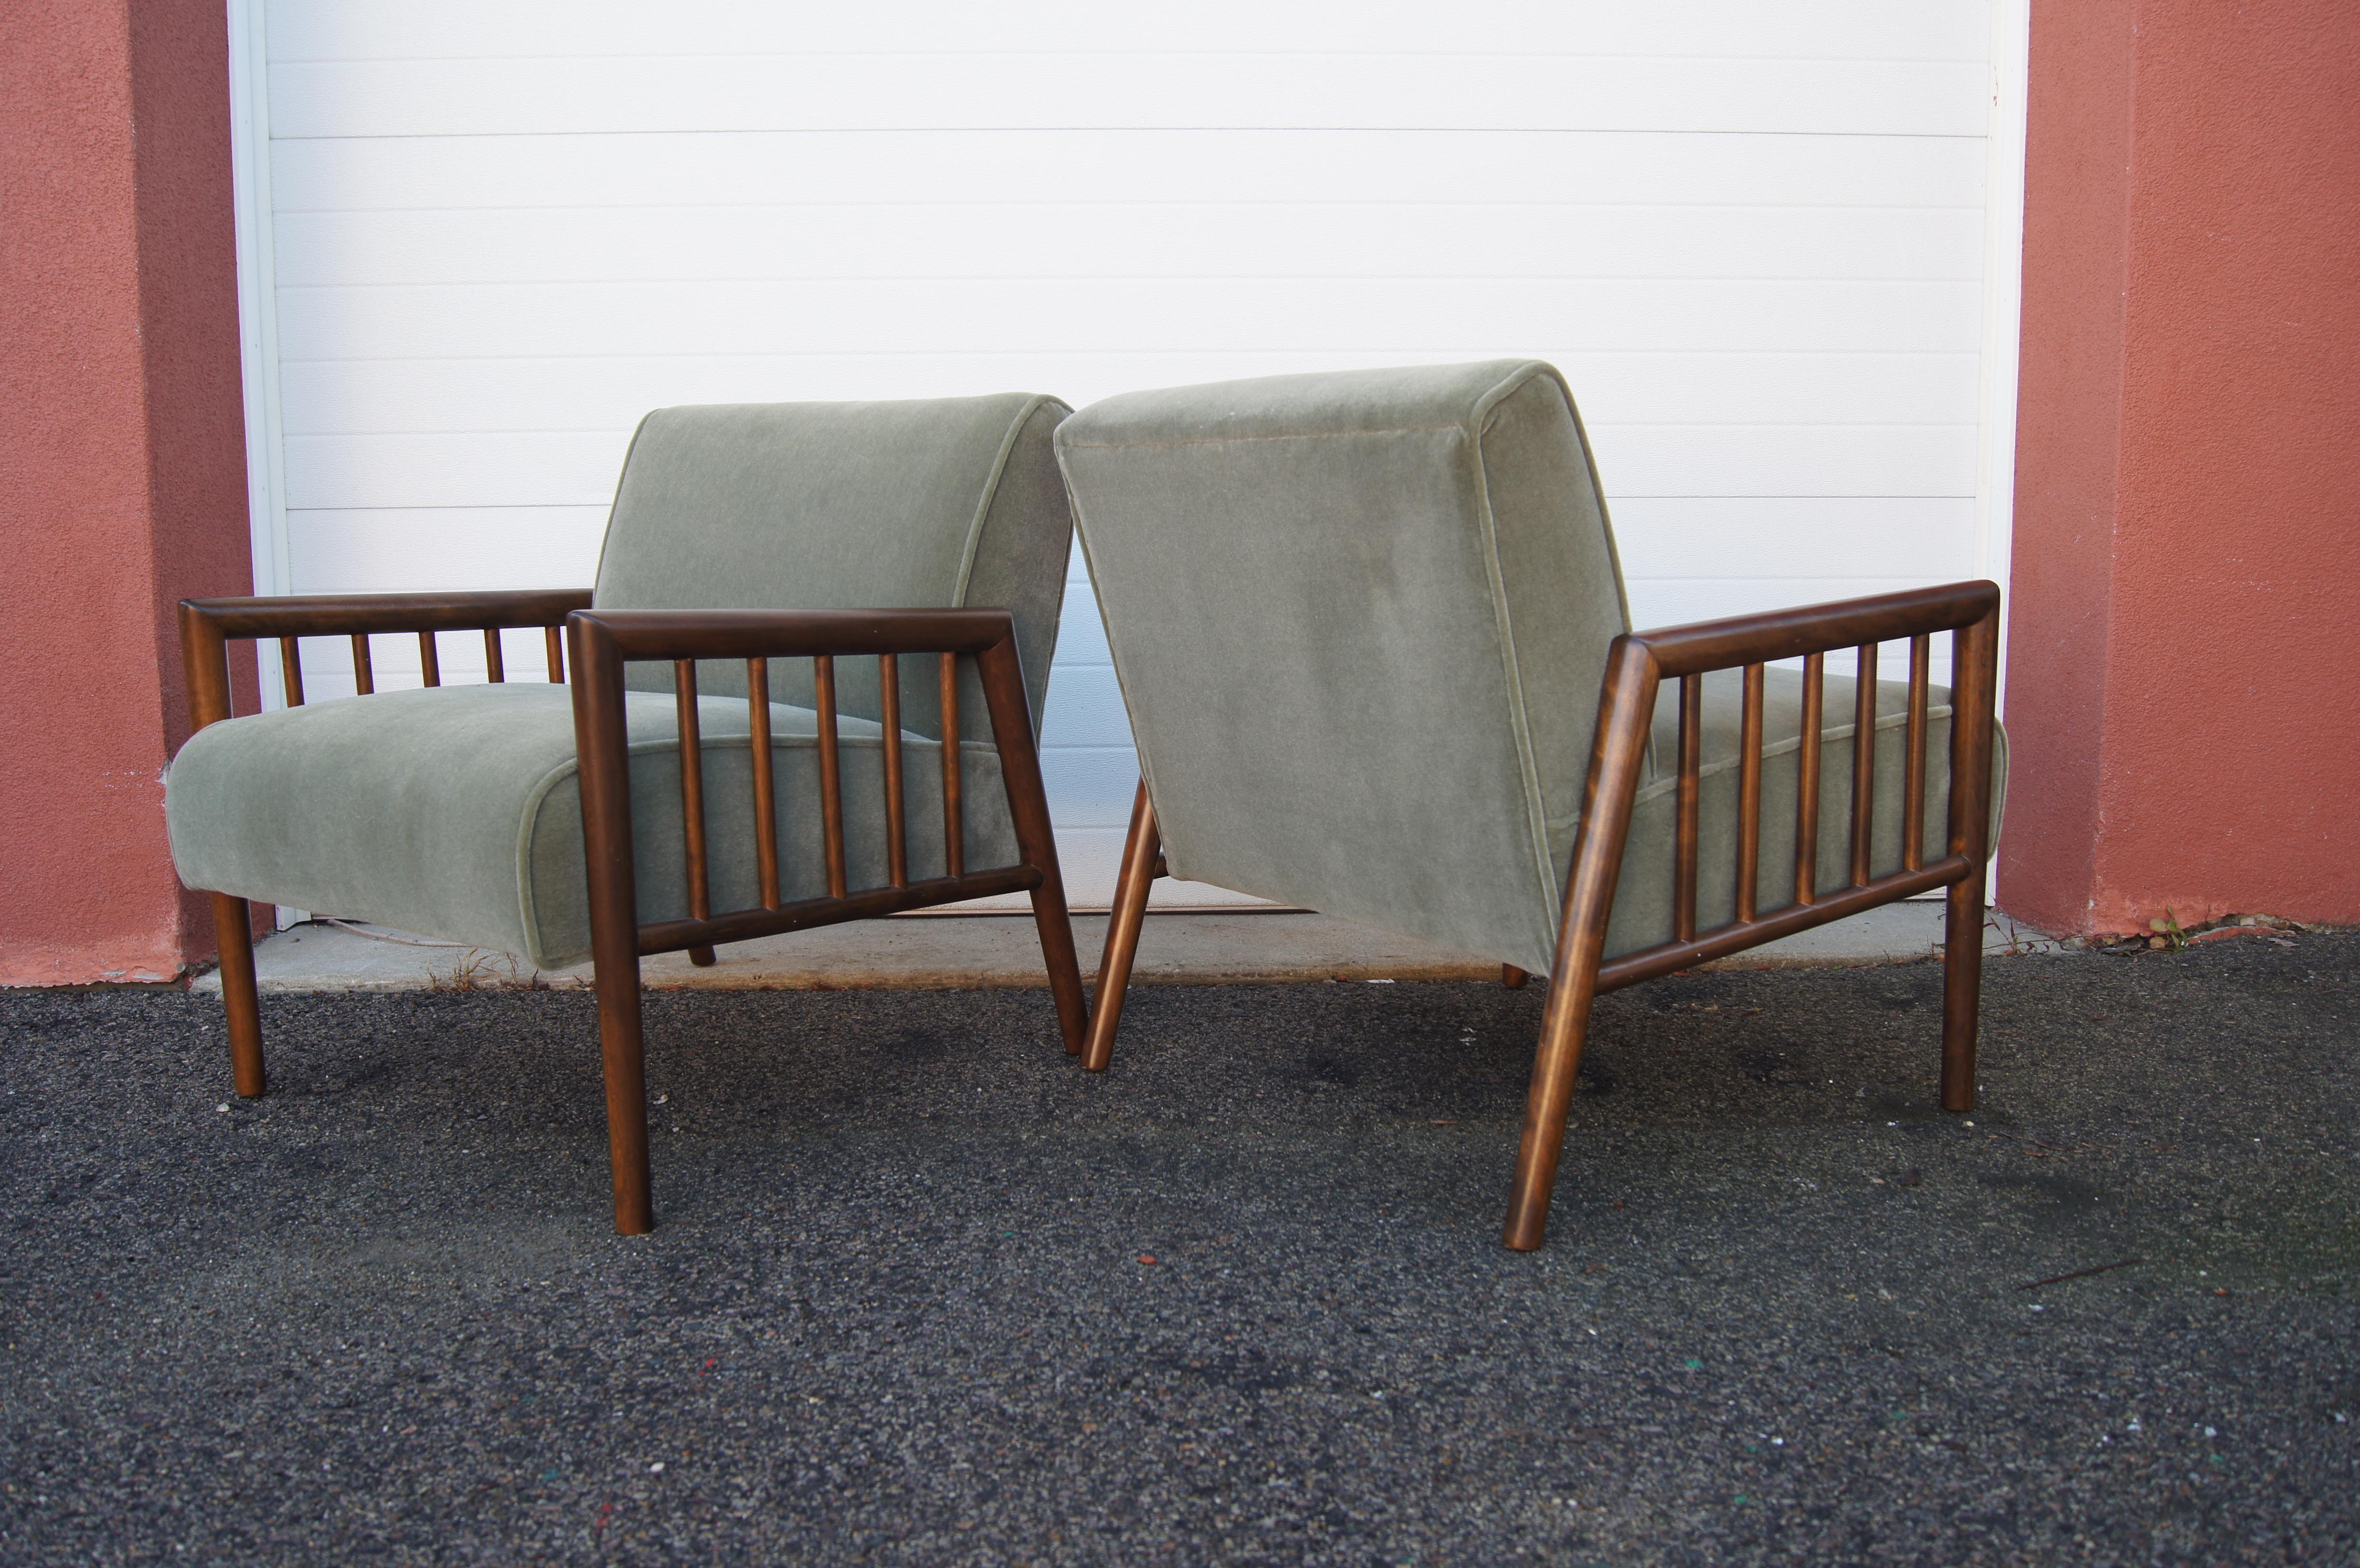 Mid-20th Century Pair of Maple Lounge Chairs by Conant Ball, Attributed to Leslie Diamond